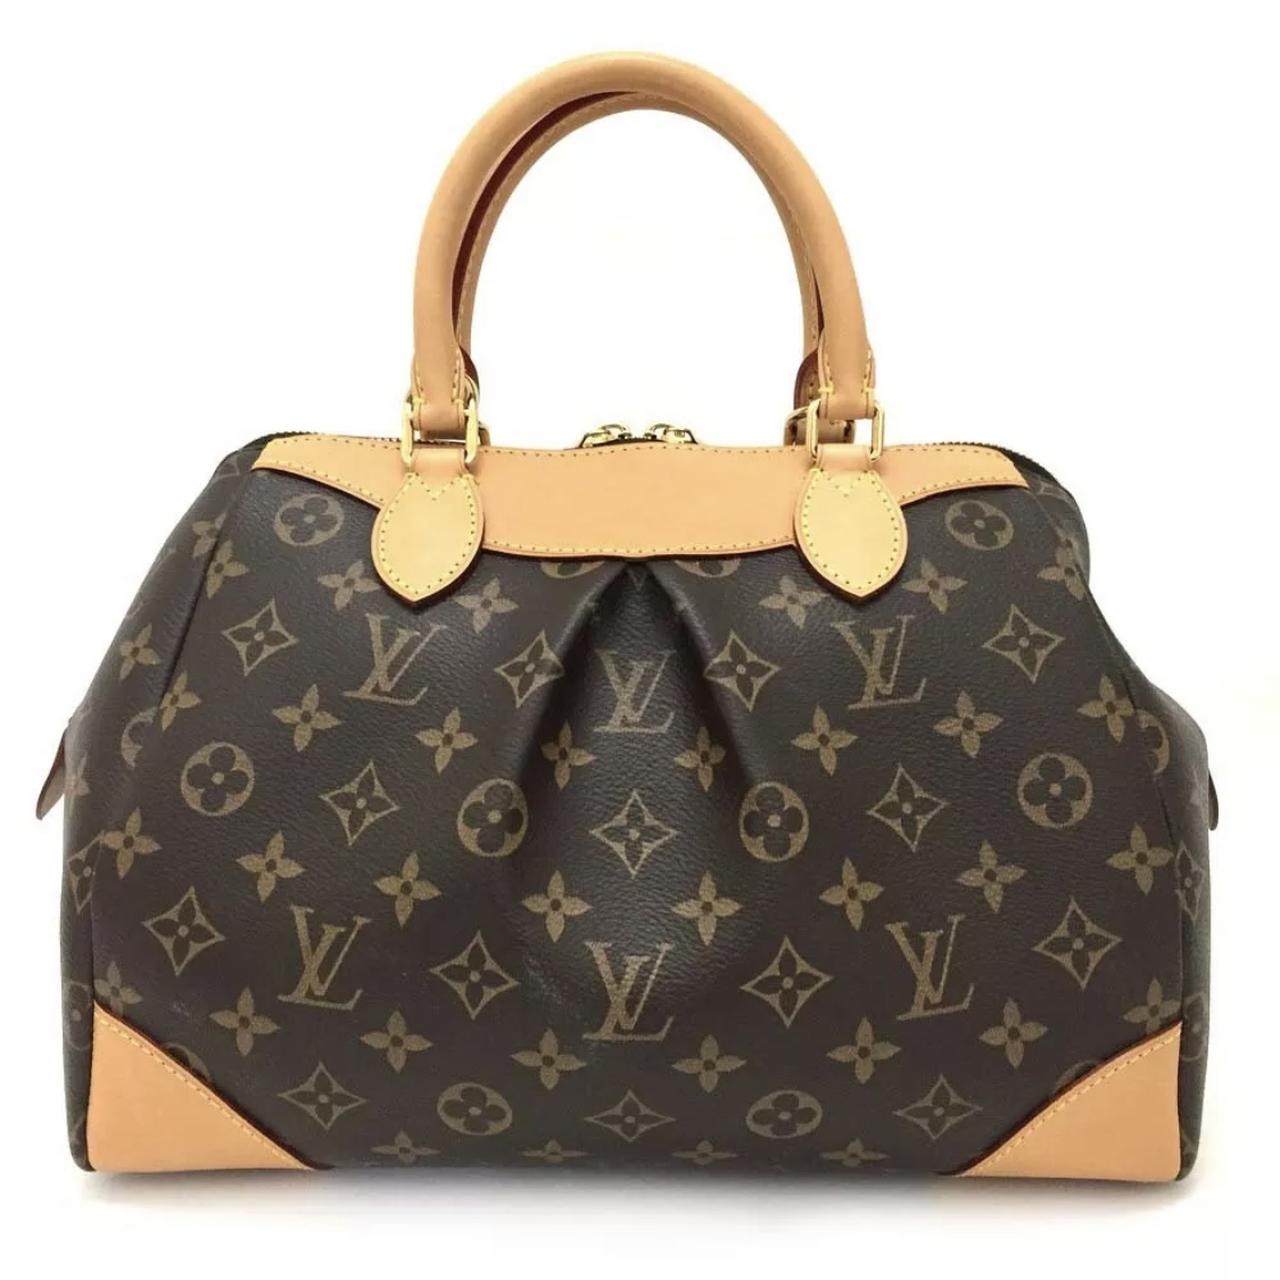 Louis Vuitton - Authenticated Double Zip Handbag - Cloth Brown Abstract For Woman, Never Worn